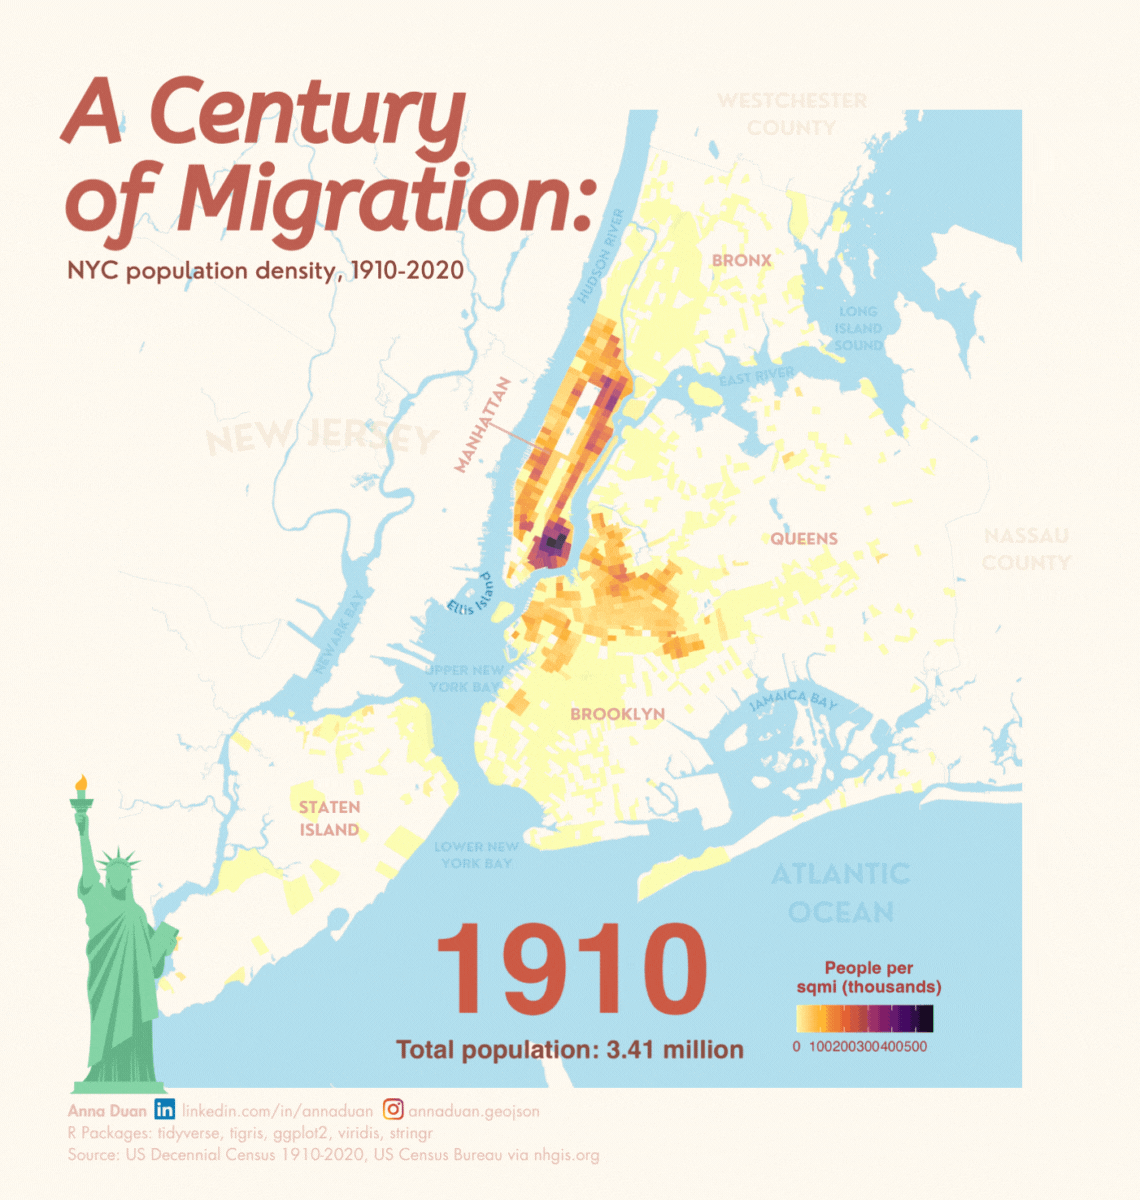 A century of migration: NYC population density 1910-2020 by Anna Duan